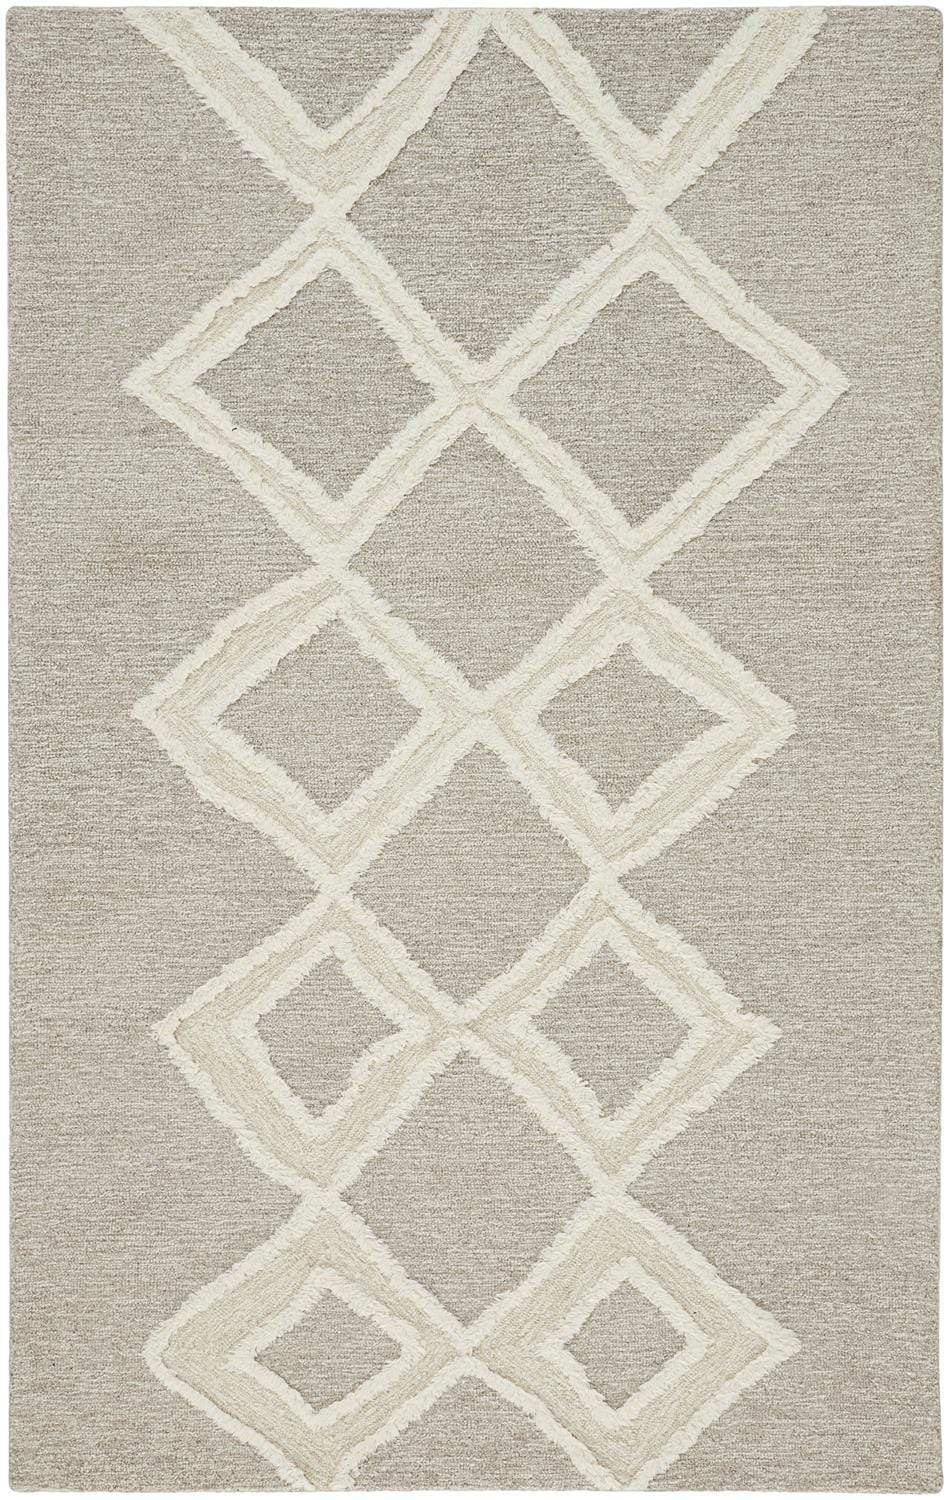 Feizy Feizy Anica Premium Wool Tufted Moroccan Style Rug - Taupe & Ivory - Available in 6 Sizes 4' x 6' ANC8009FBRN000C00